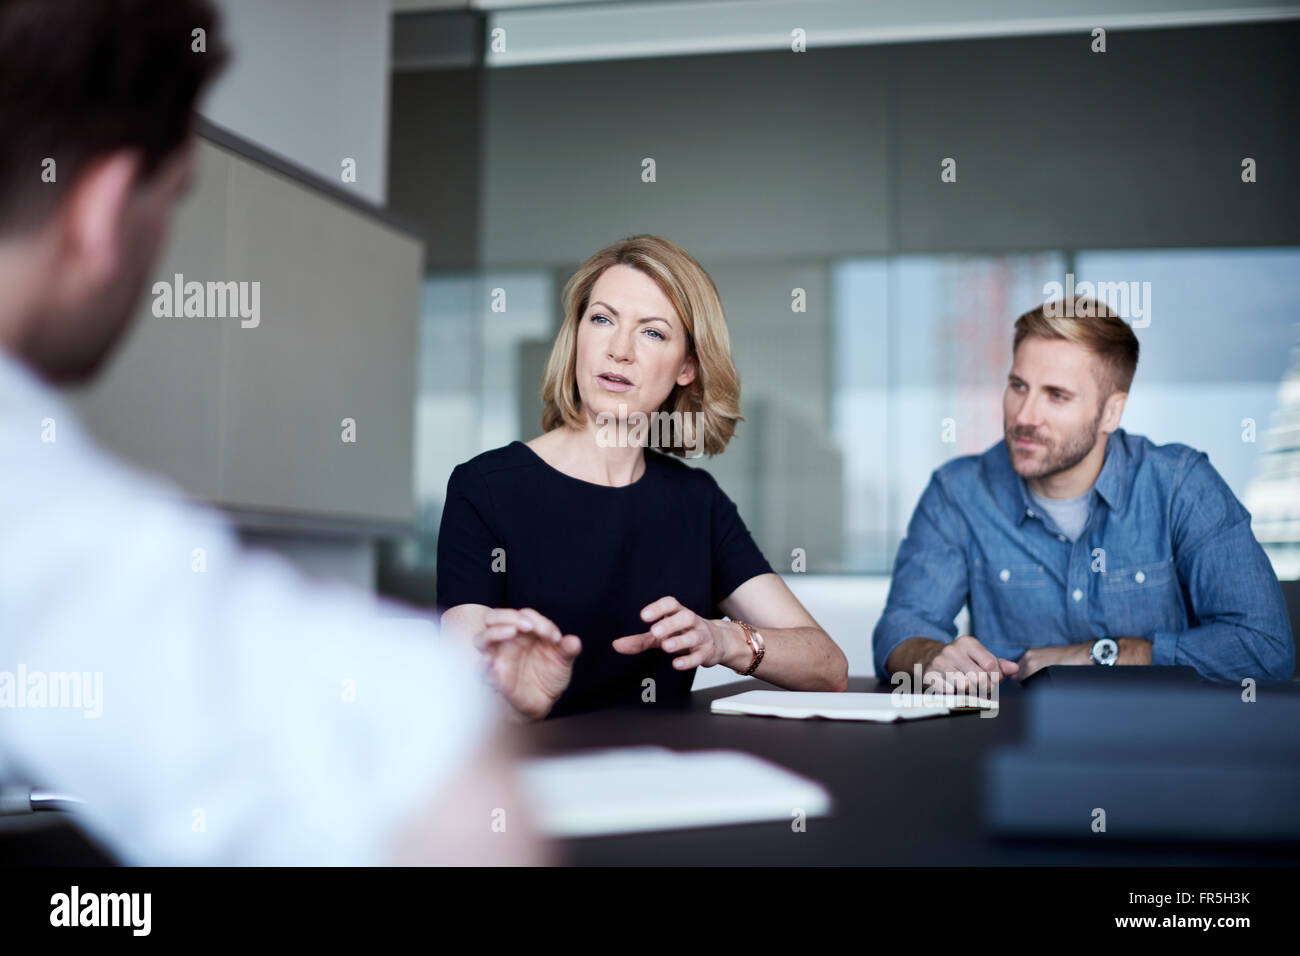 Businesswoman talking in meeting Banque D'Images